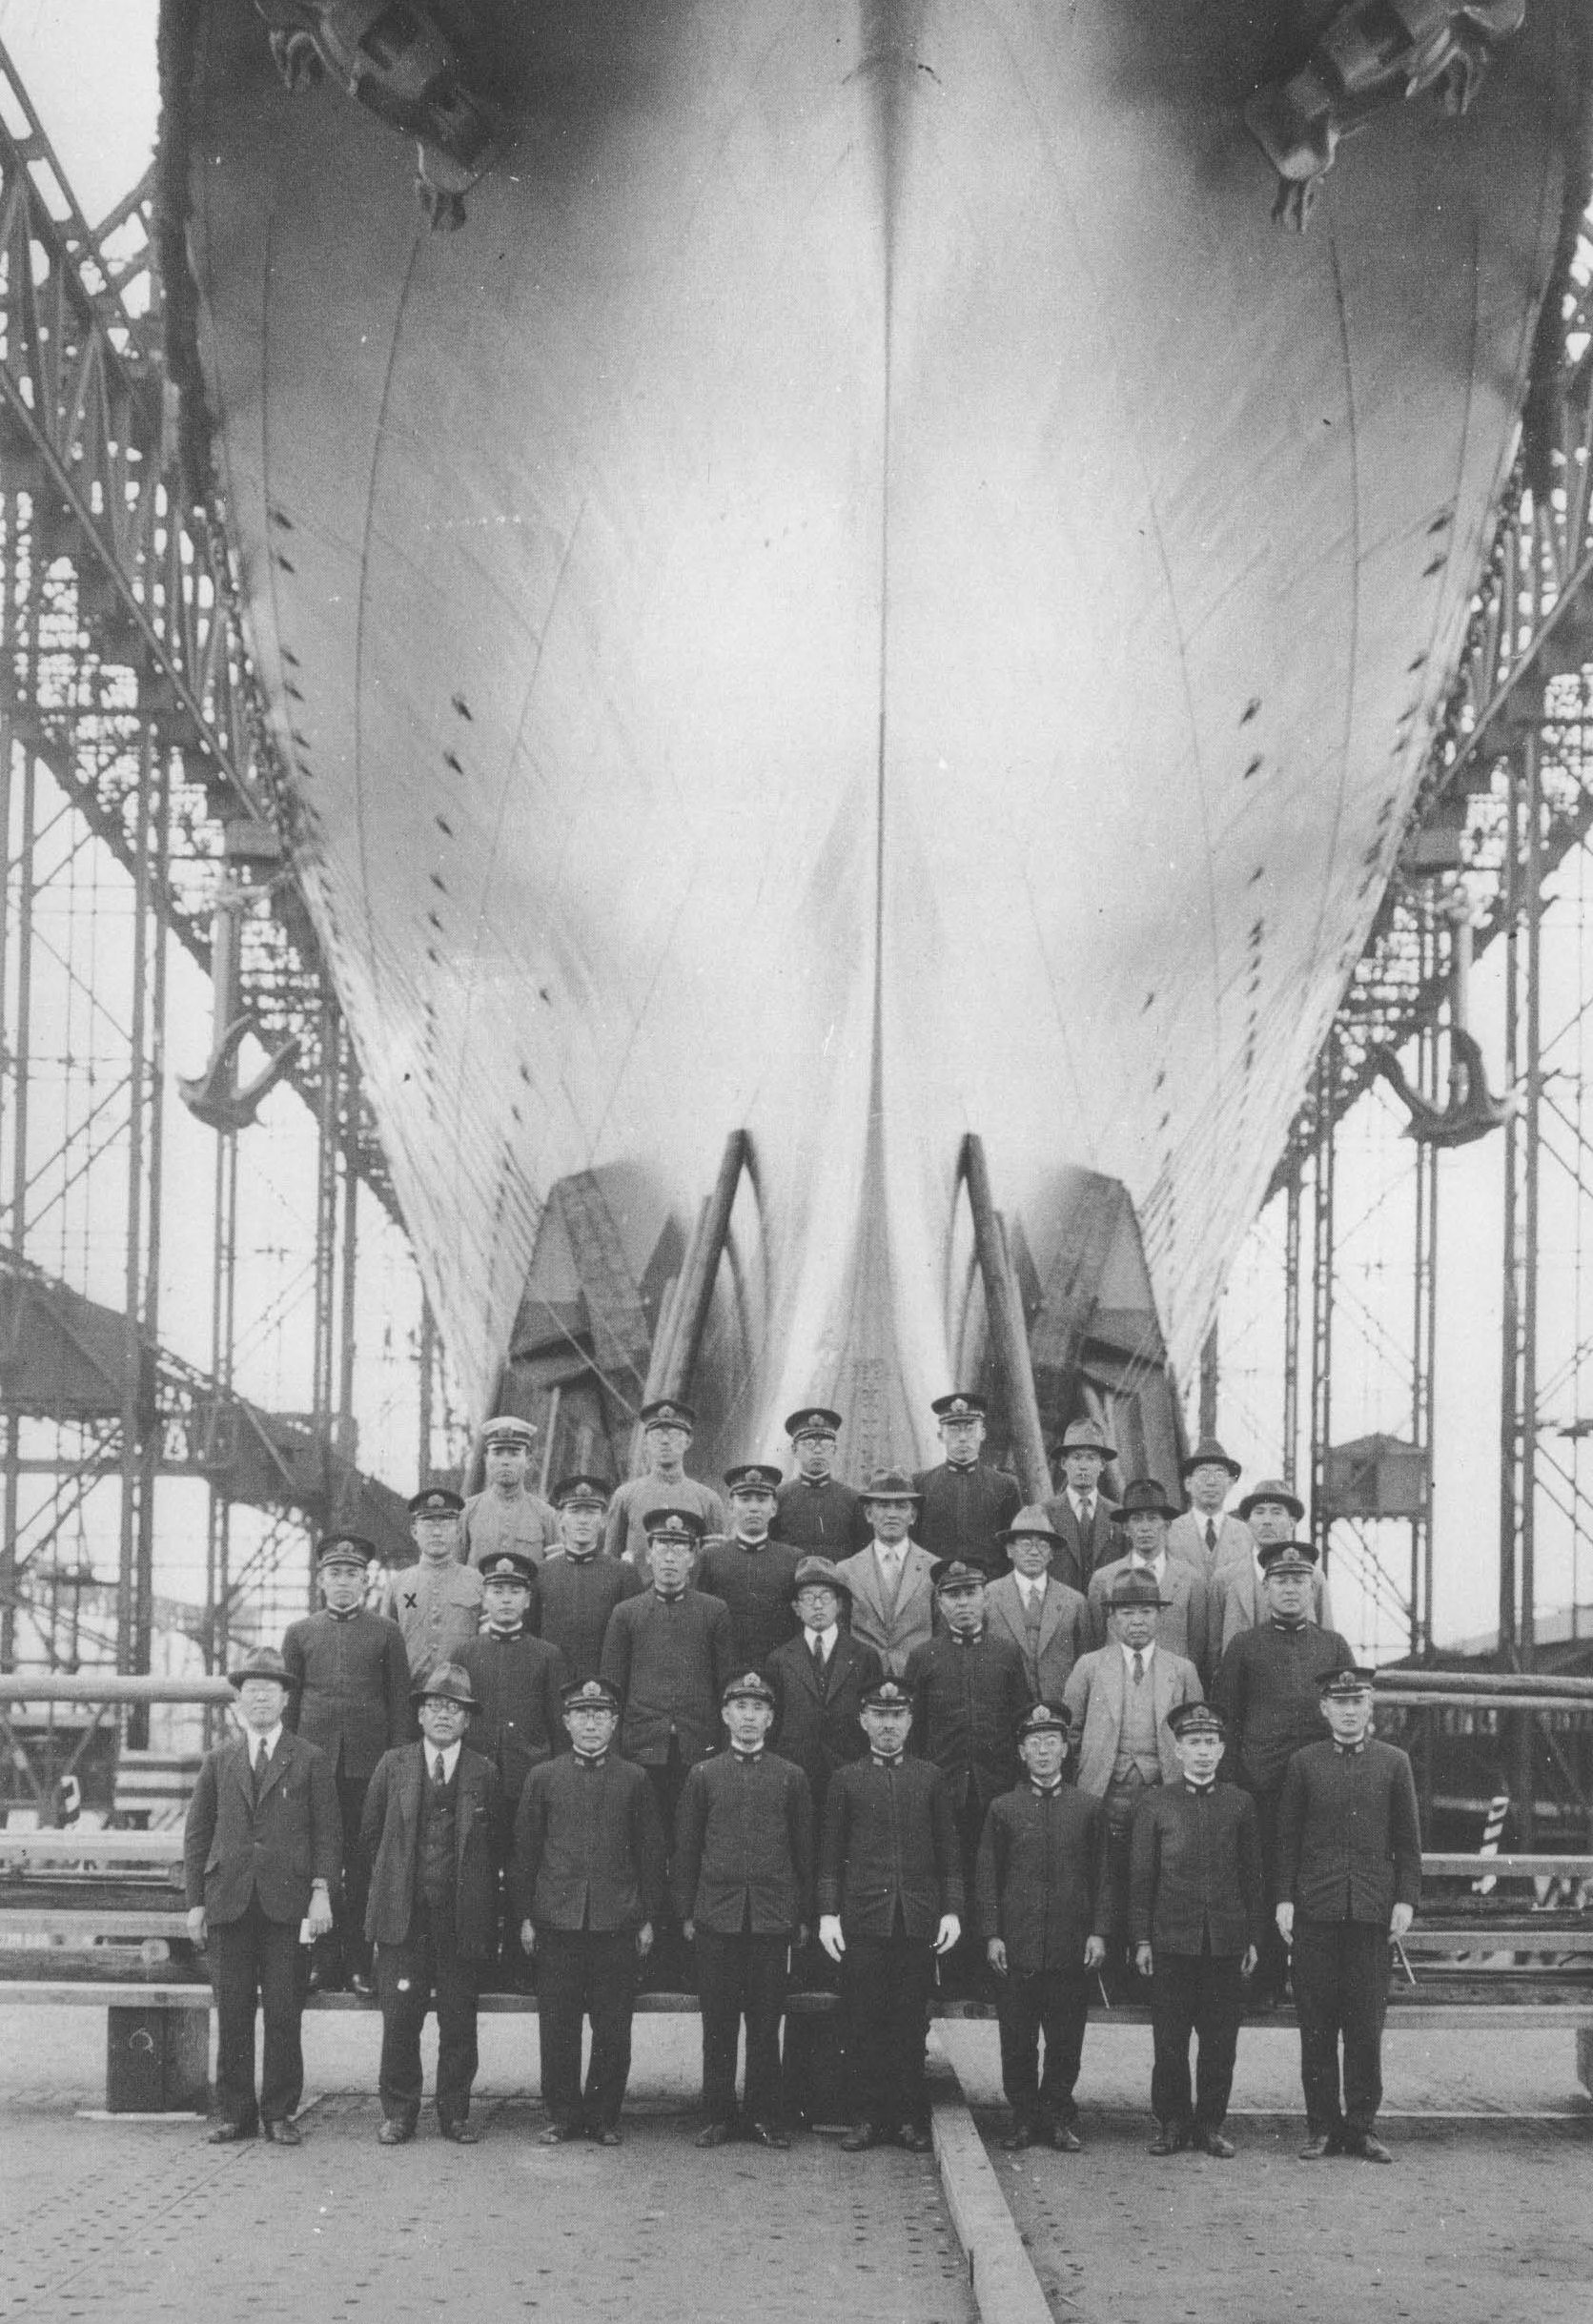 The chief shipbuilders of carrier Shokaku posing with the hull of the ship two days prior to launching, Yokosuka, Japan, 30 May 1939